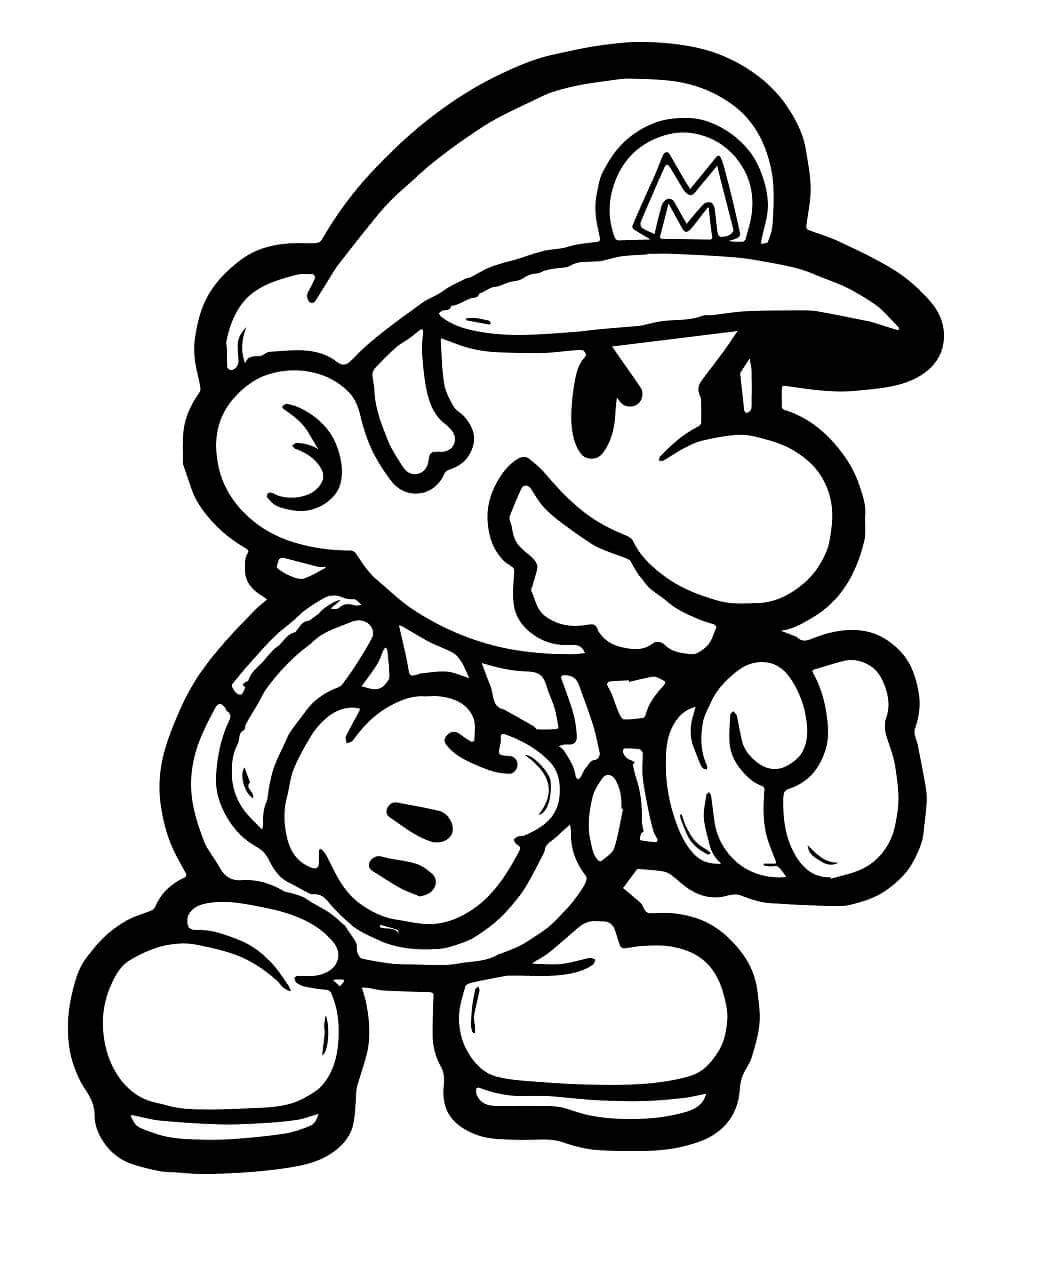 toadette coloring pages